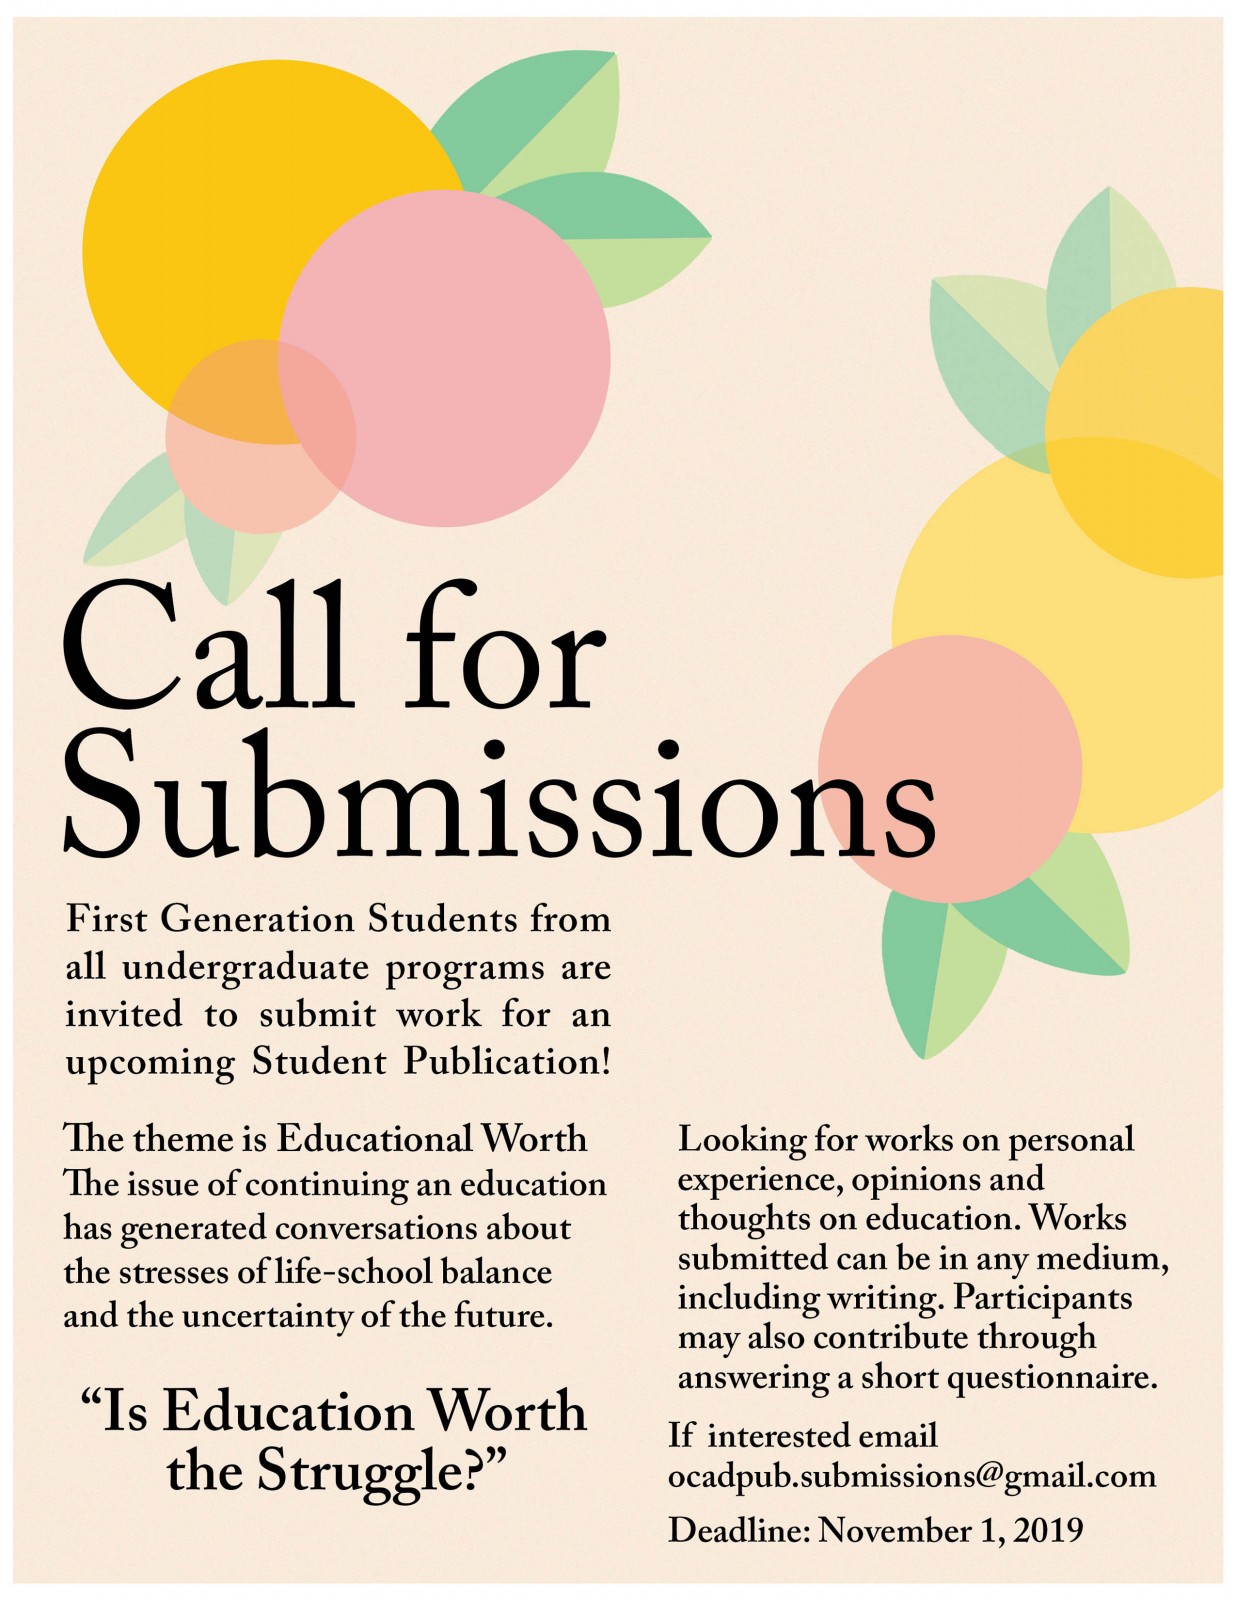 Call for submissions graphic